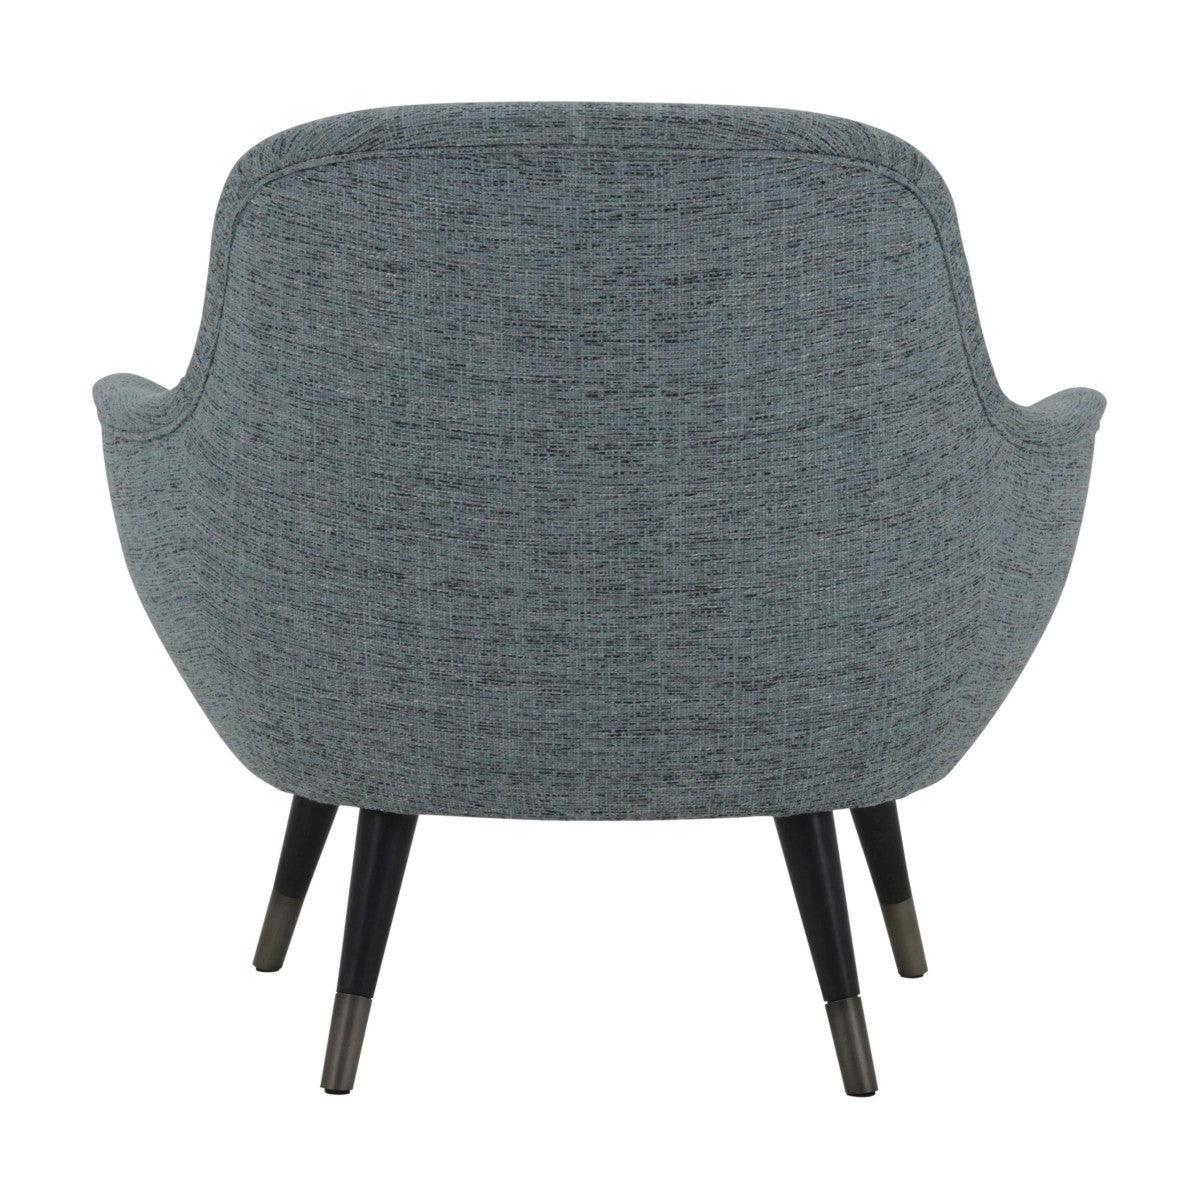 Club Bespoke Upholstered Comfortable Contemporary Club Armchair MS9633P Custom Made To Order